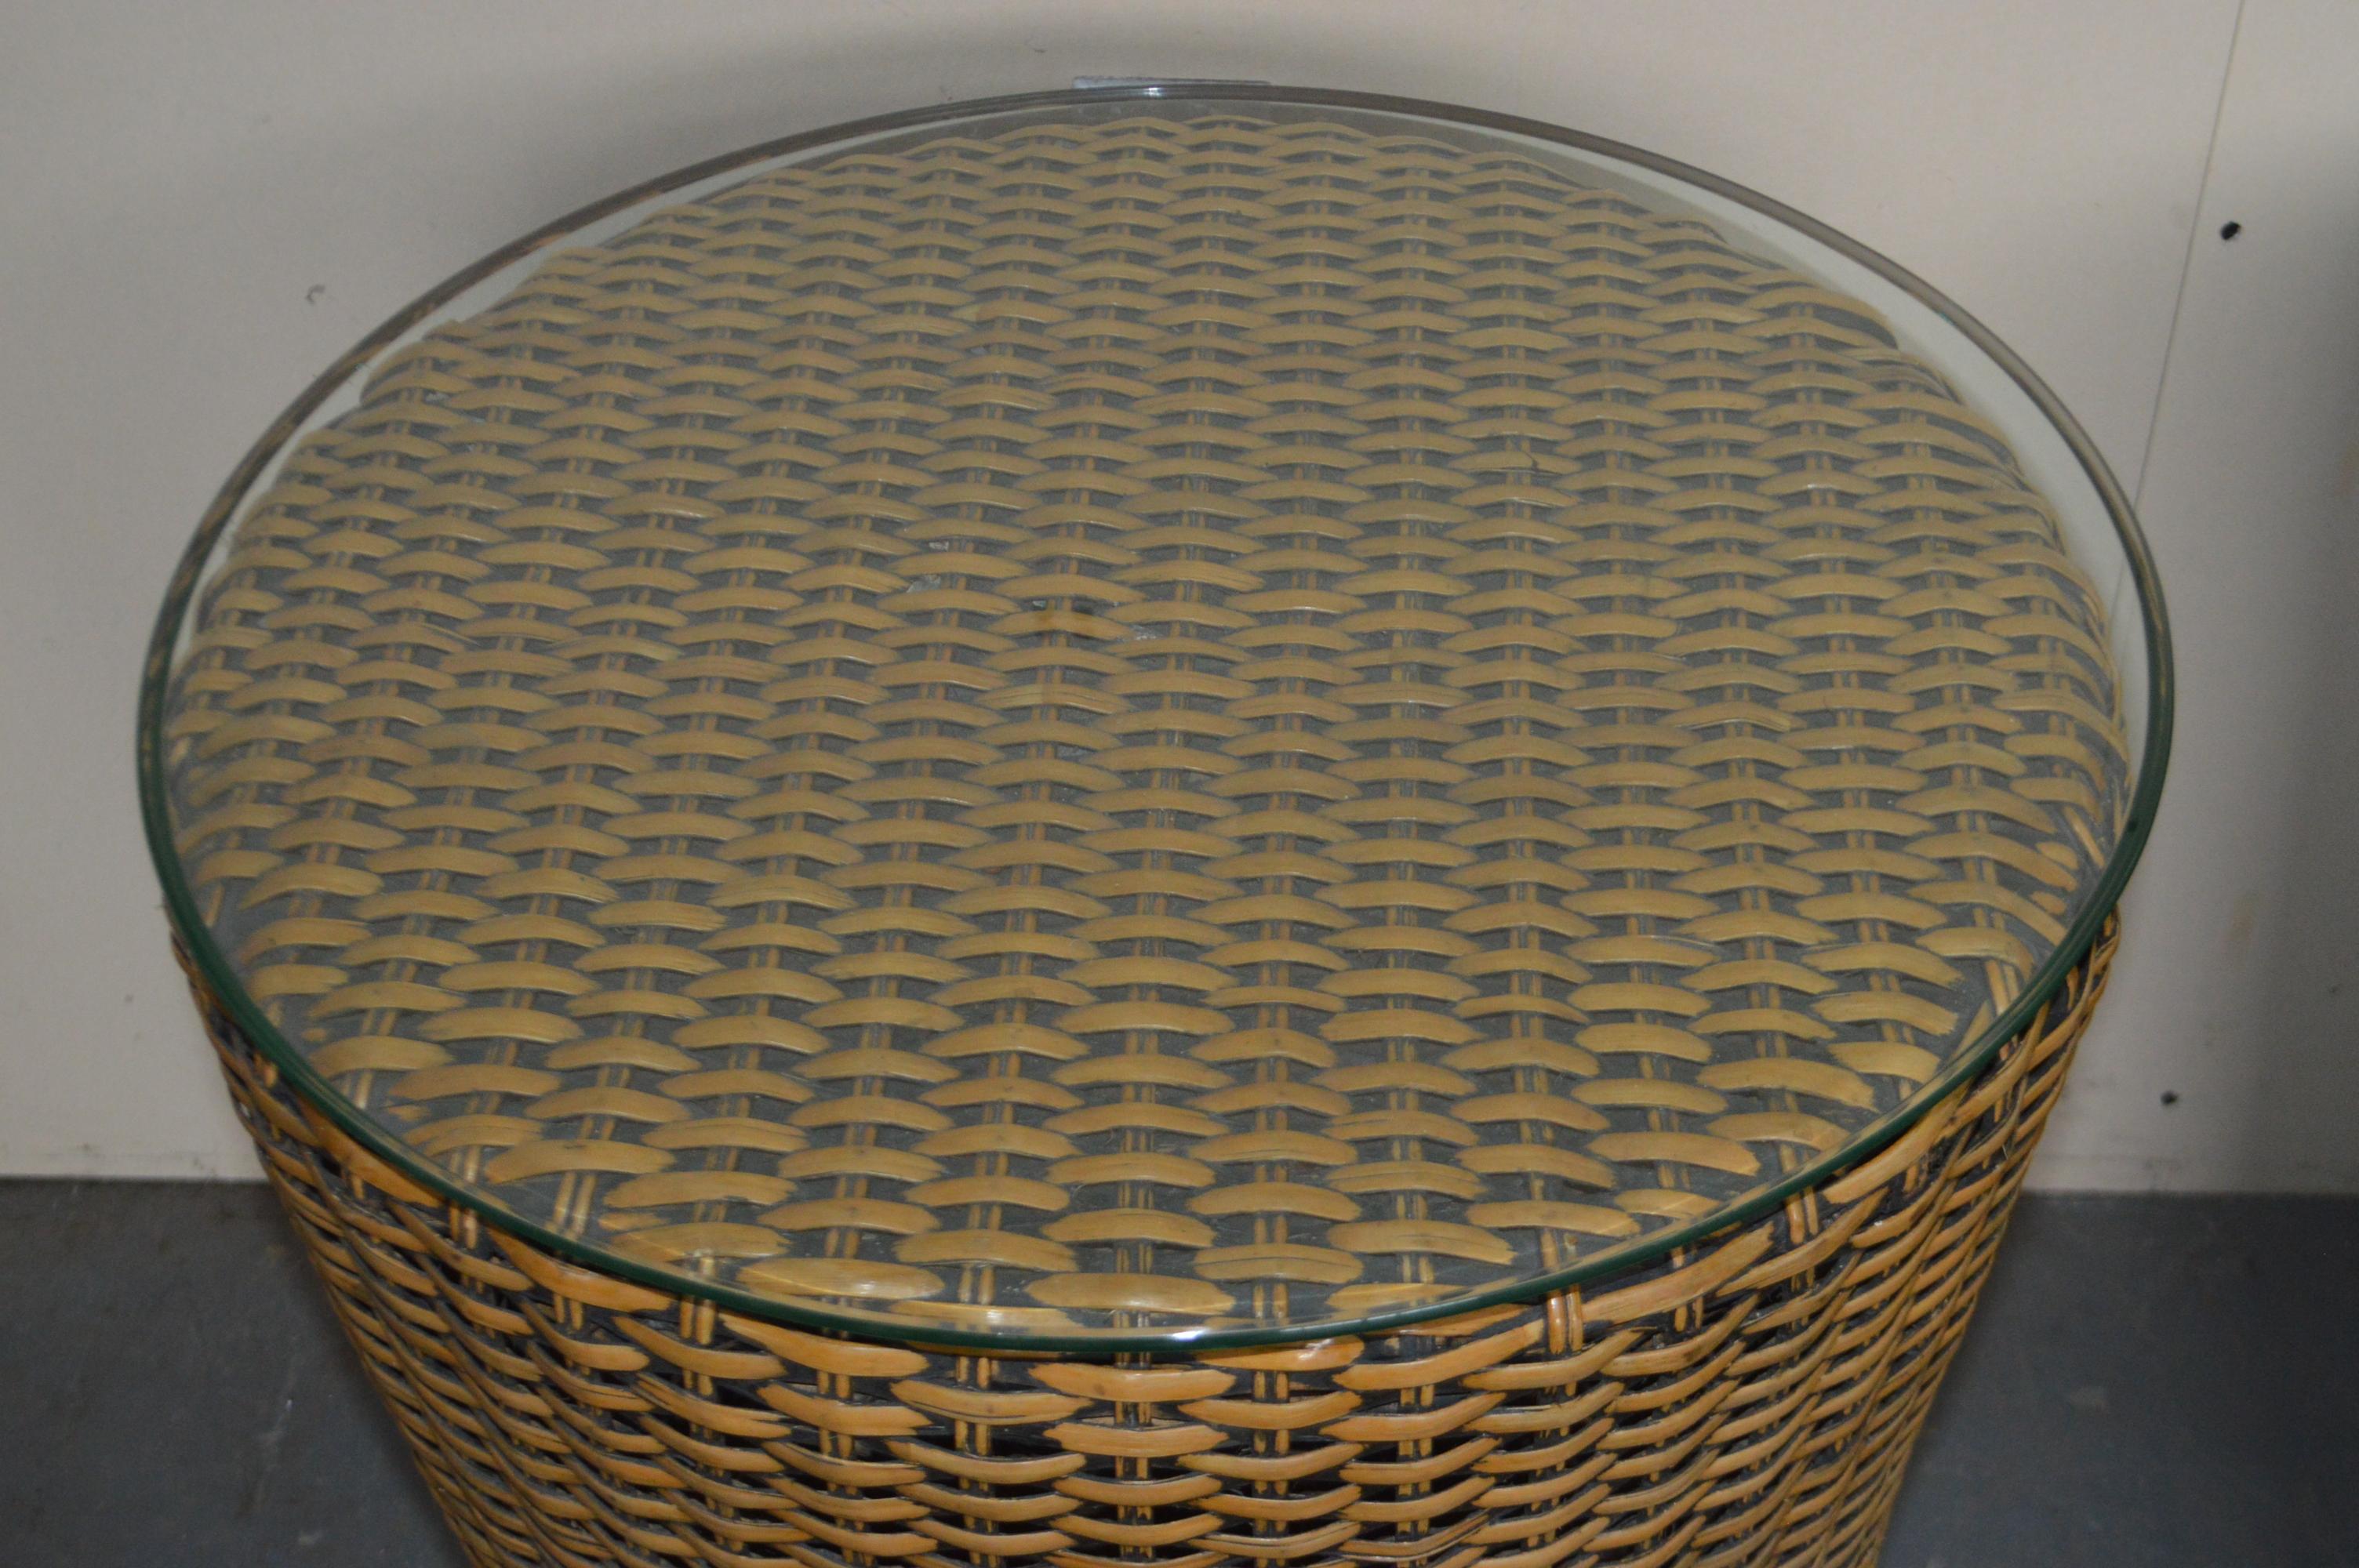 Pair of unusual custom rattan side tables, good for outdoor or indoor.
They are in good condition and have custom glass tops.